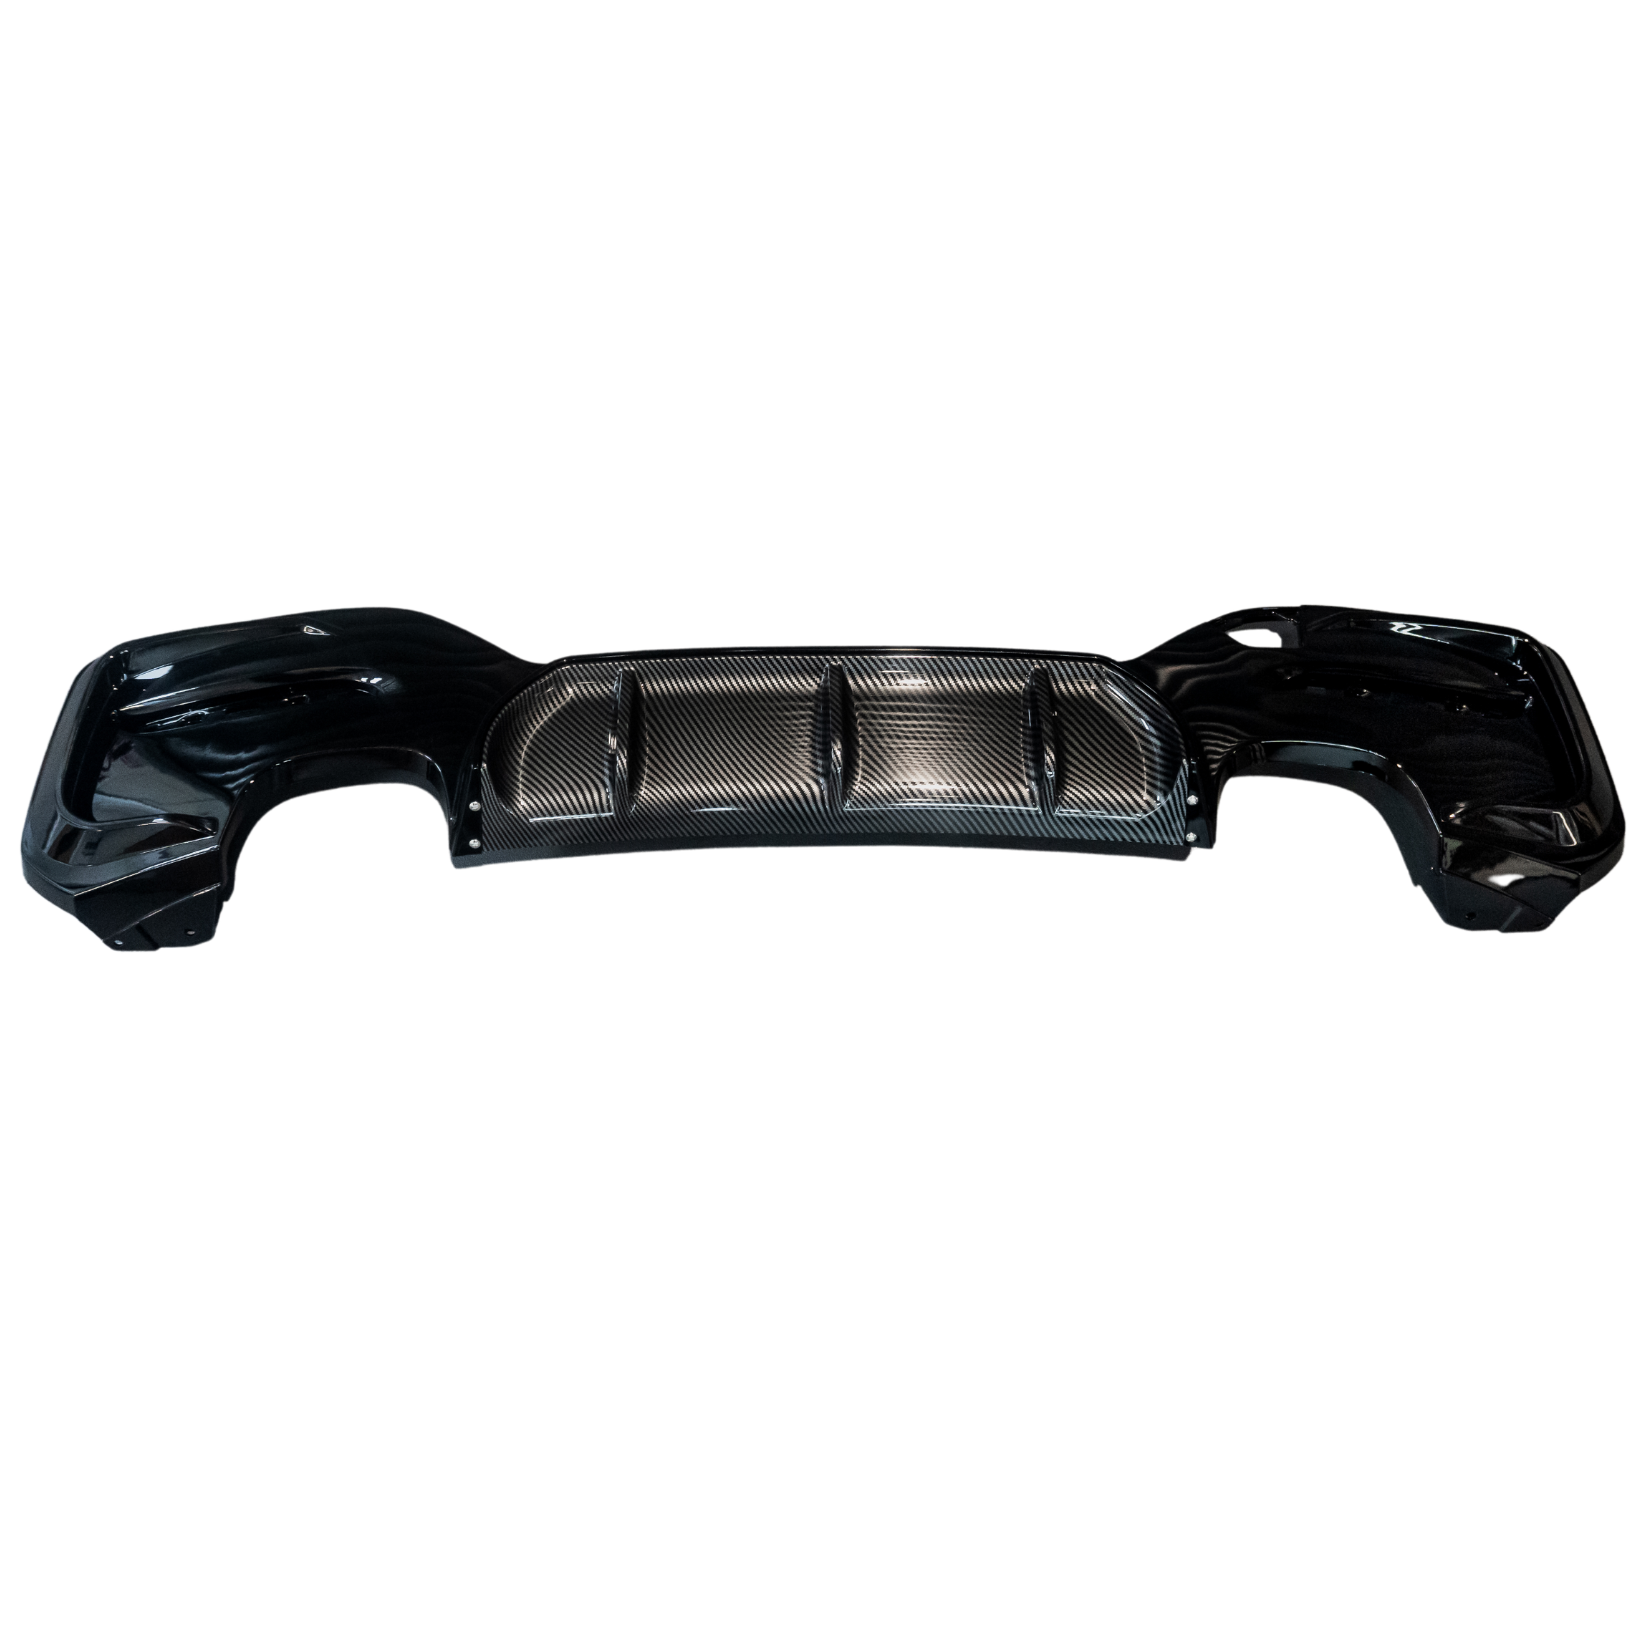 BMW 1 Series F20 LCI 2015-2019 Rear Diffuser 00___00 In Carbon Look